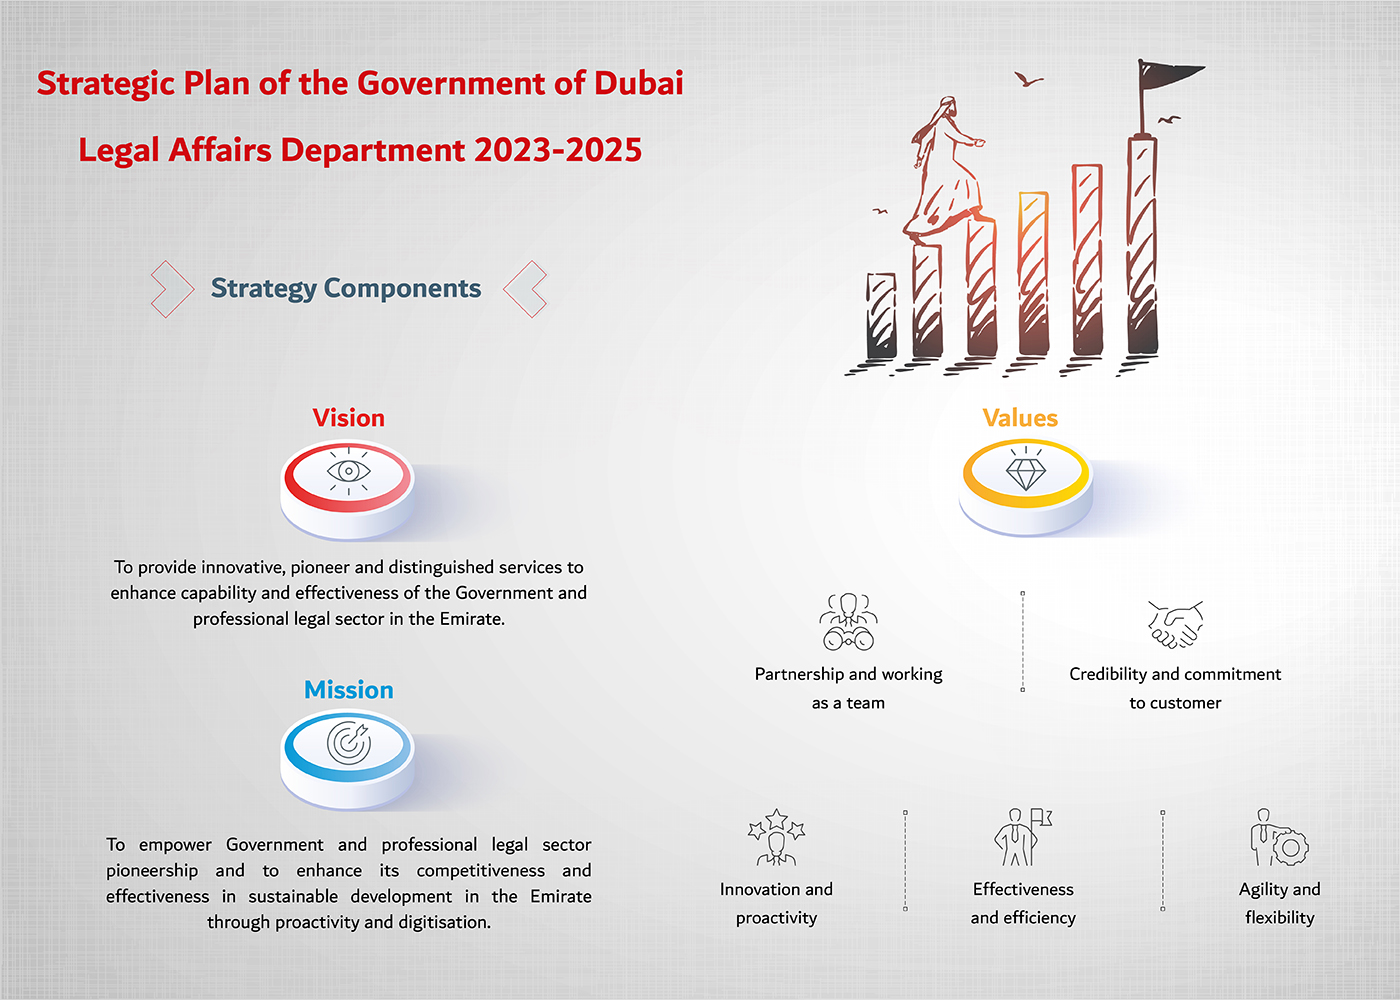 The Government of Dubai Legal Affairs Department Launches its Strategic Plan 2023-2025